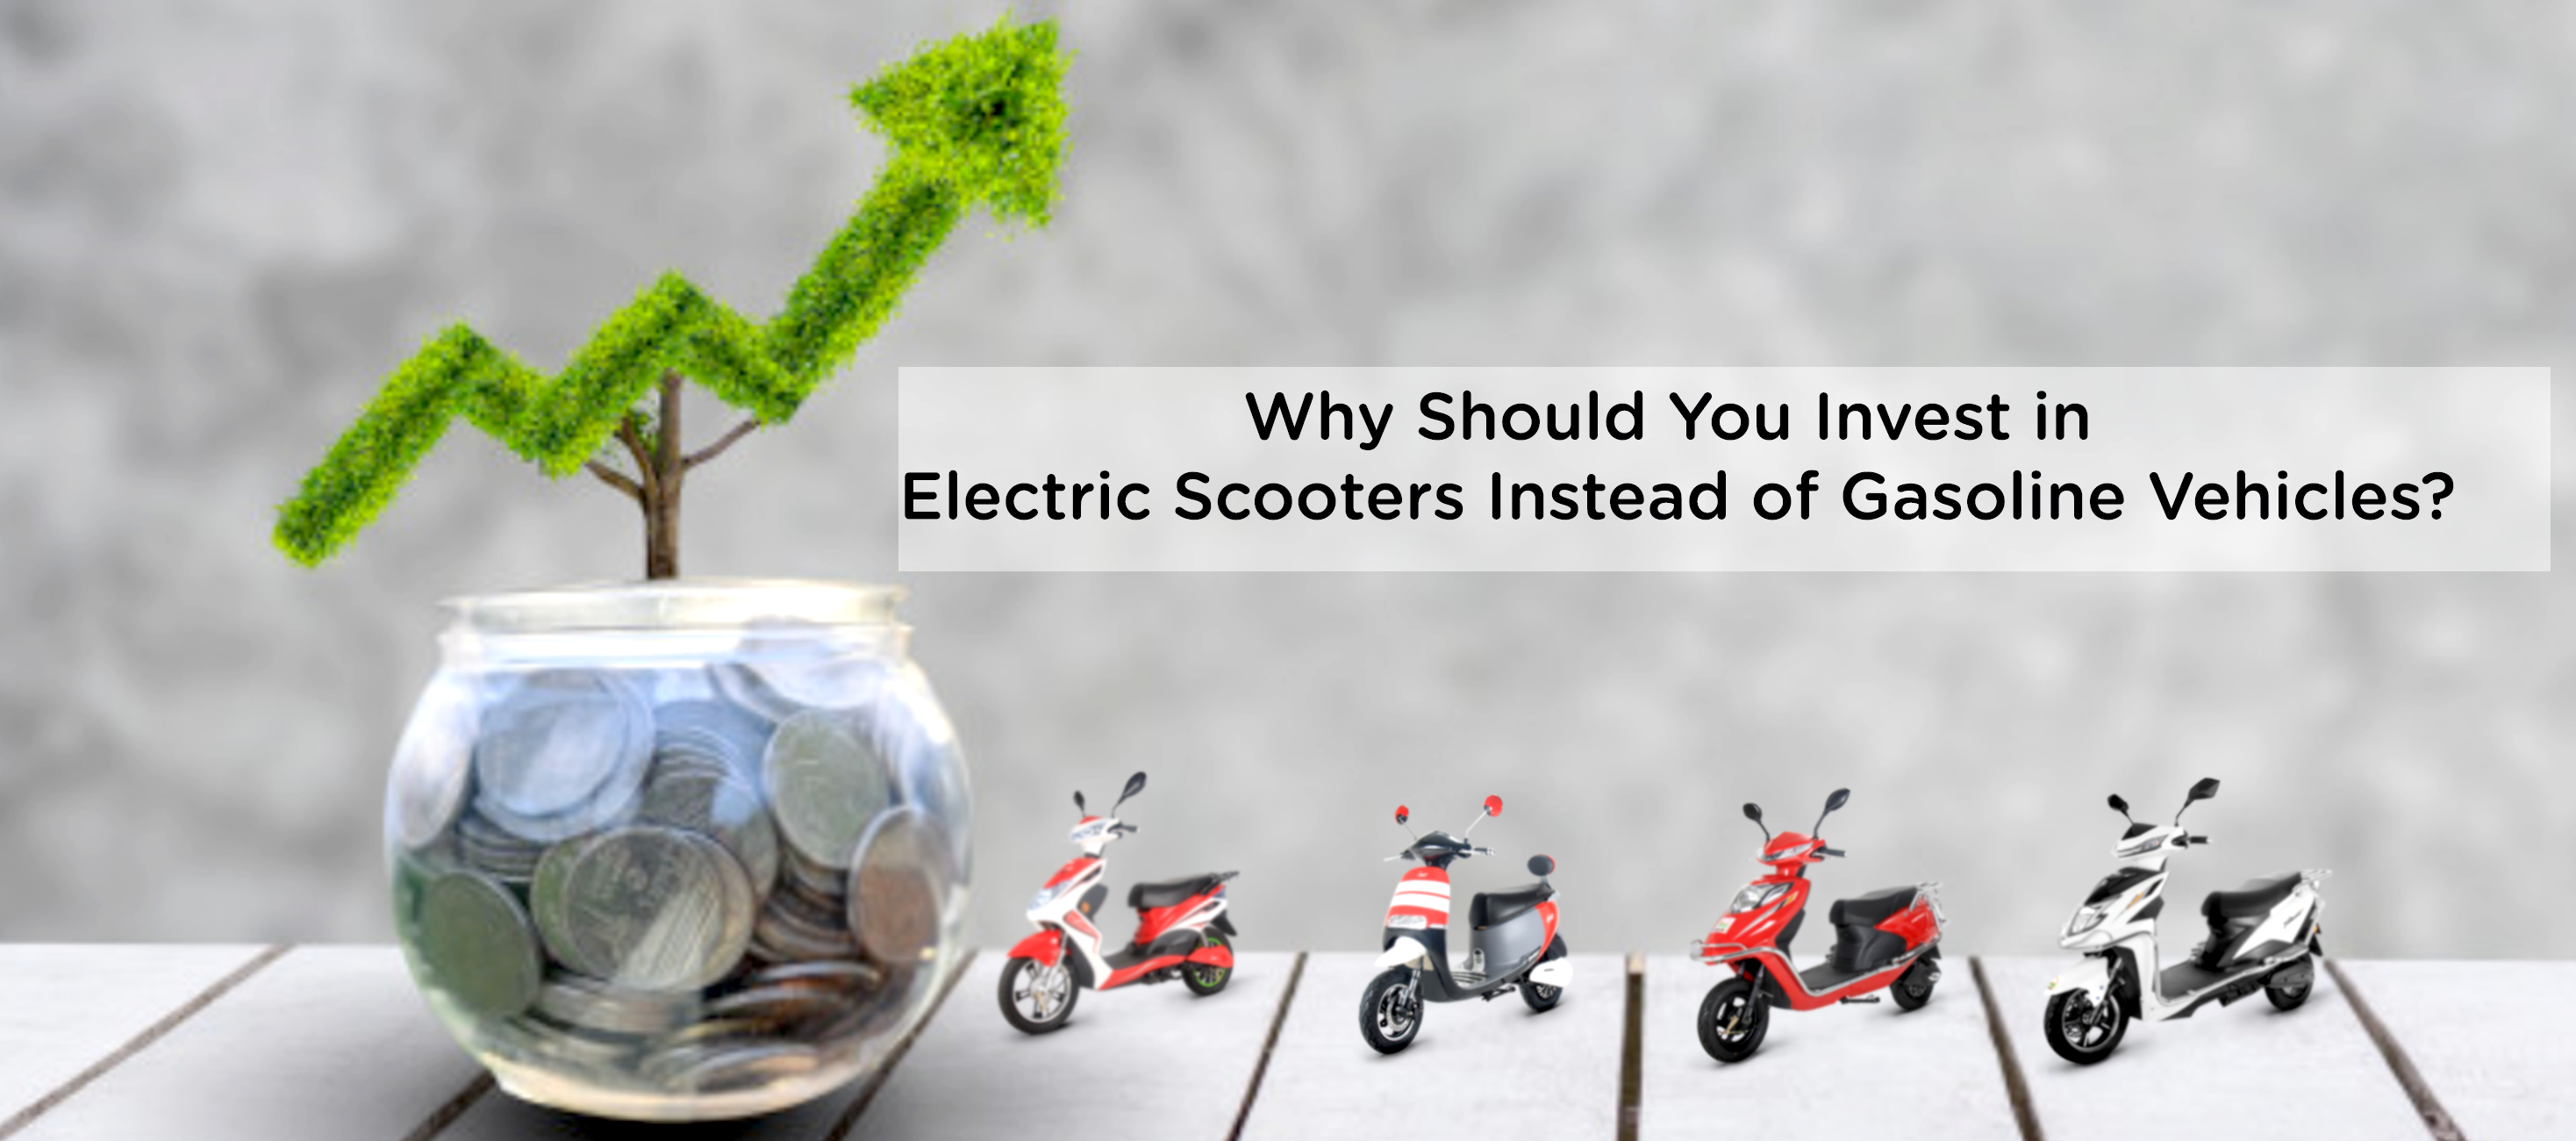 Electric Scooters Instead of Gasoline Vehicles